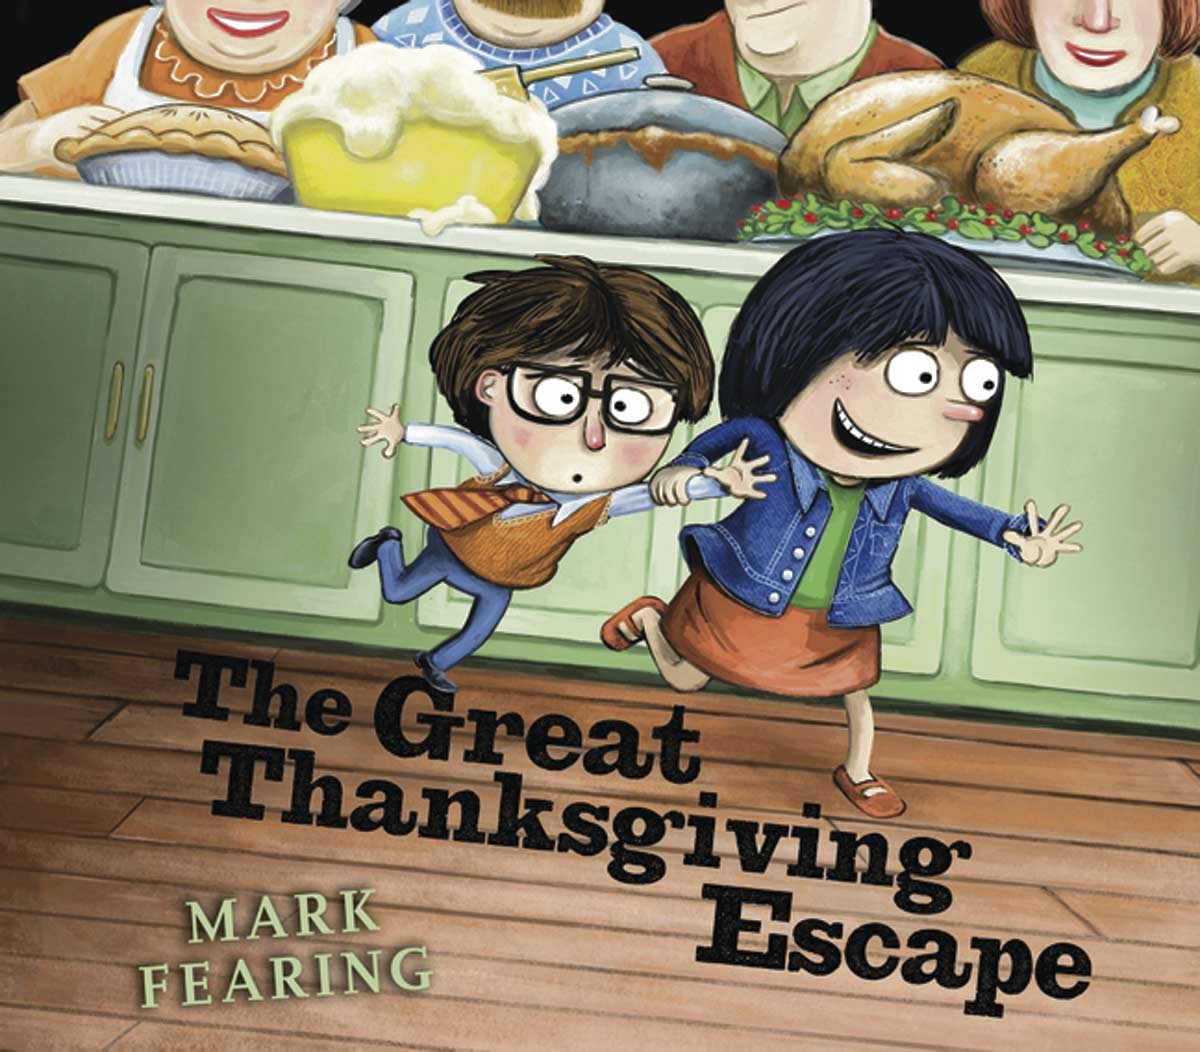 Feast or family: Cousins team up to escape adults in Thanksgiving caper